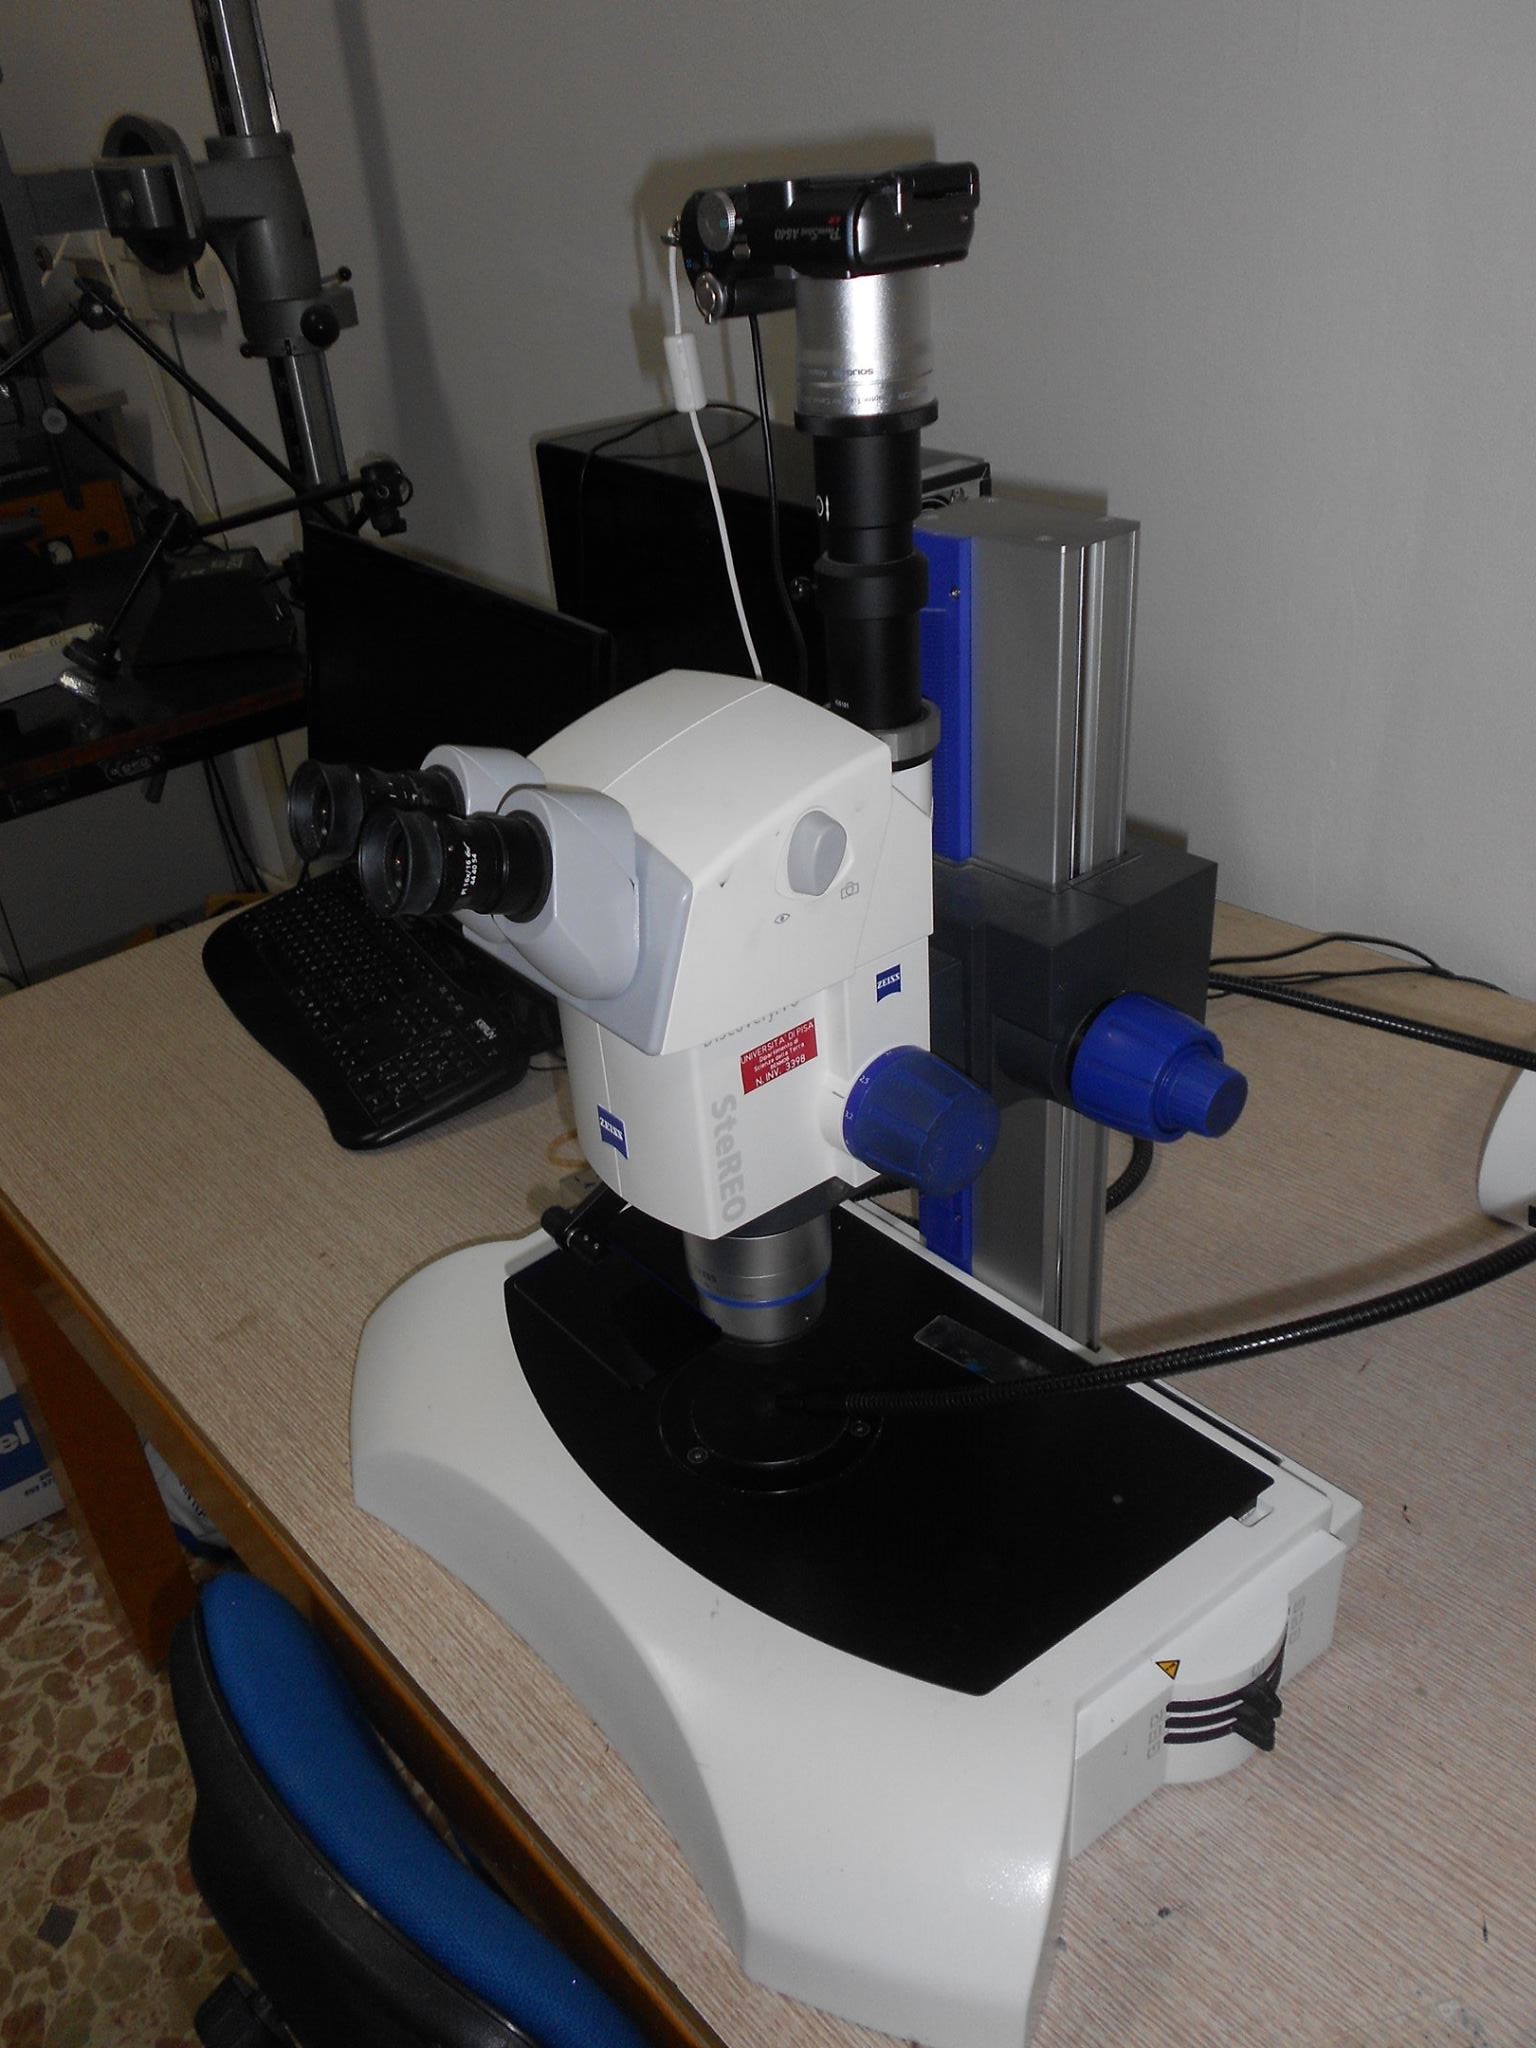 Zeiss Discovery V8 stereomicroscope